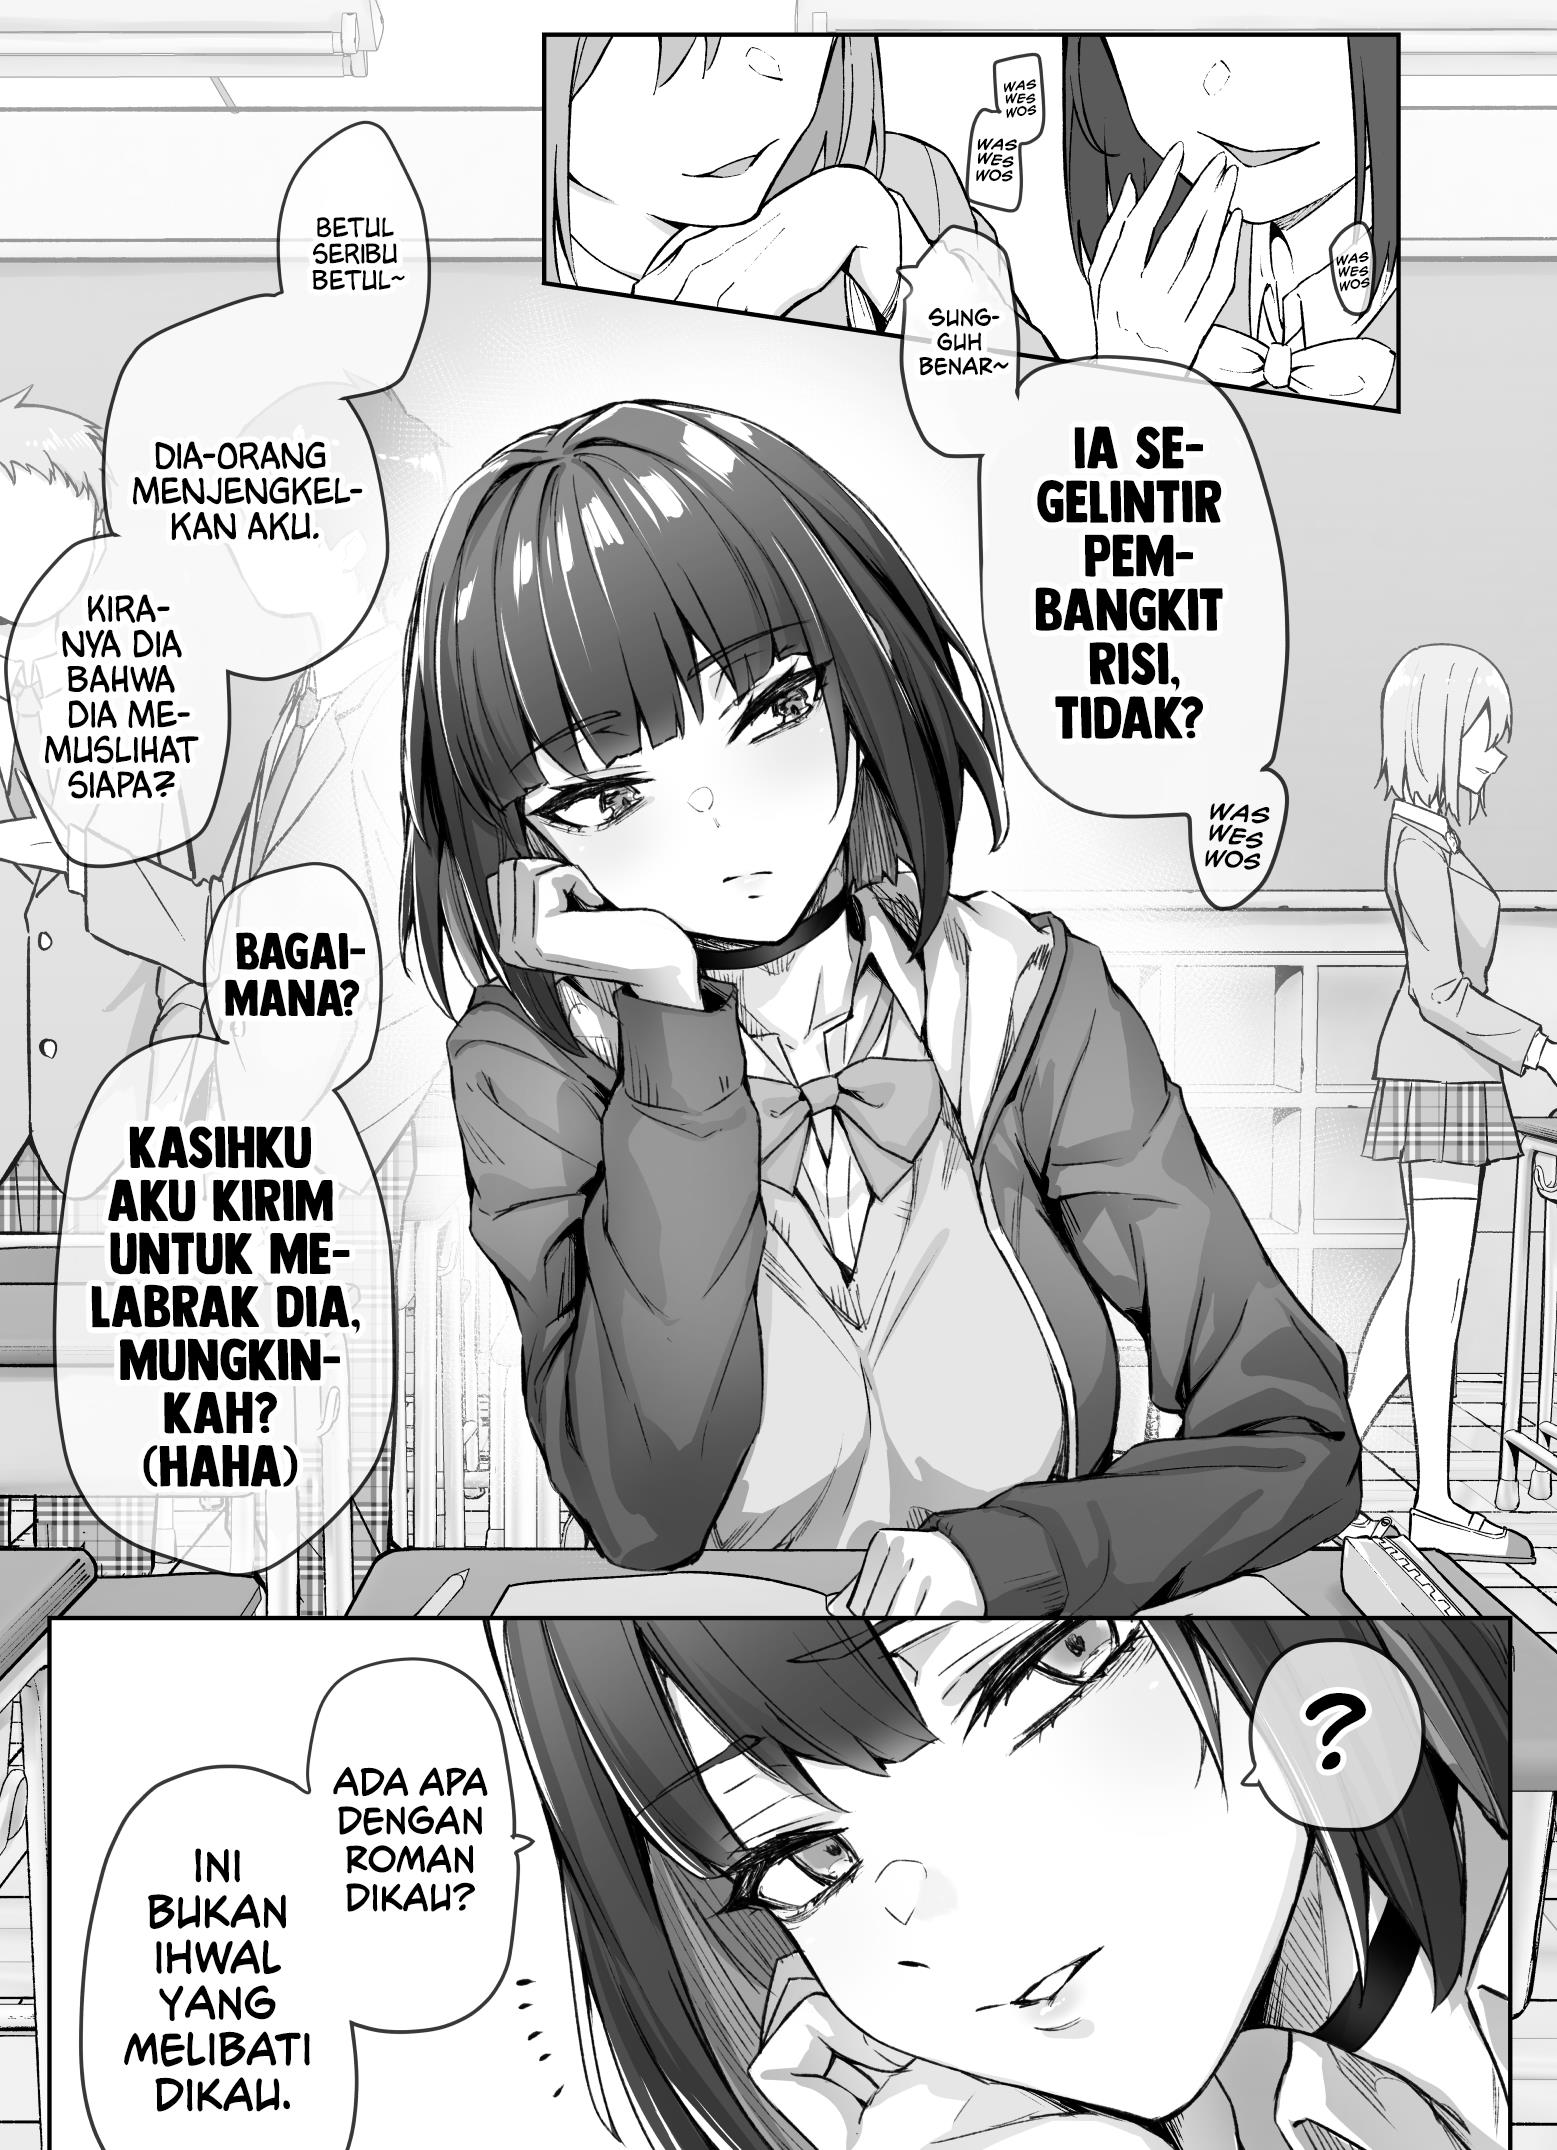 The Tsuntsuntsuntsuntsuntsun tsuntsuntsuntsuntsundere Girl Getting Less and Less Tsun Day by Day Chapter 8.1